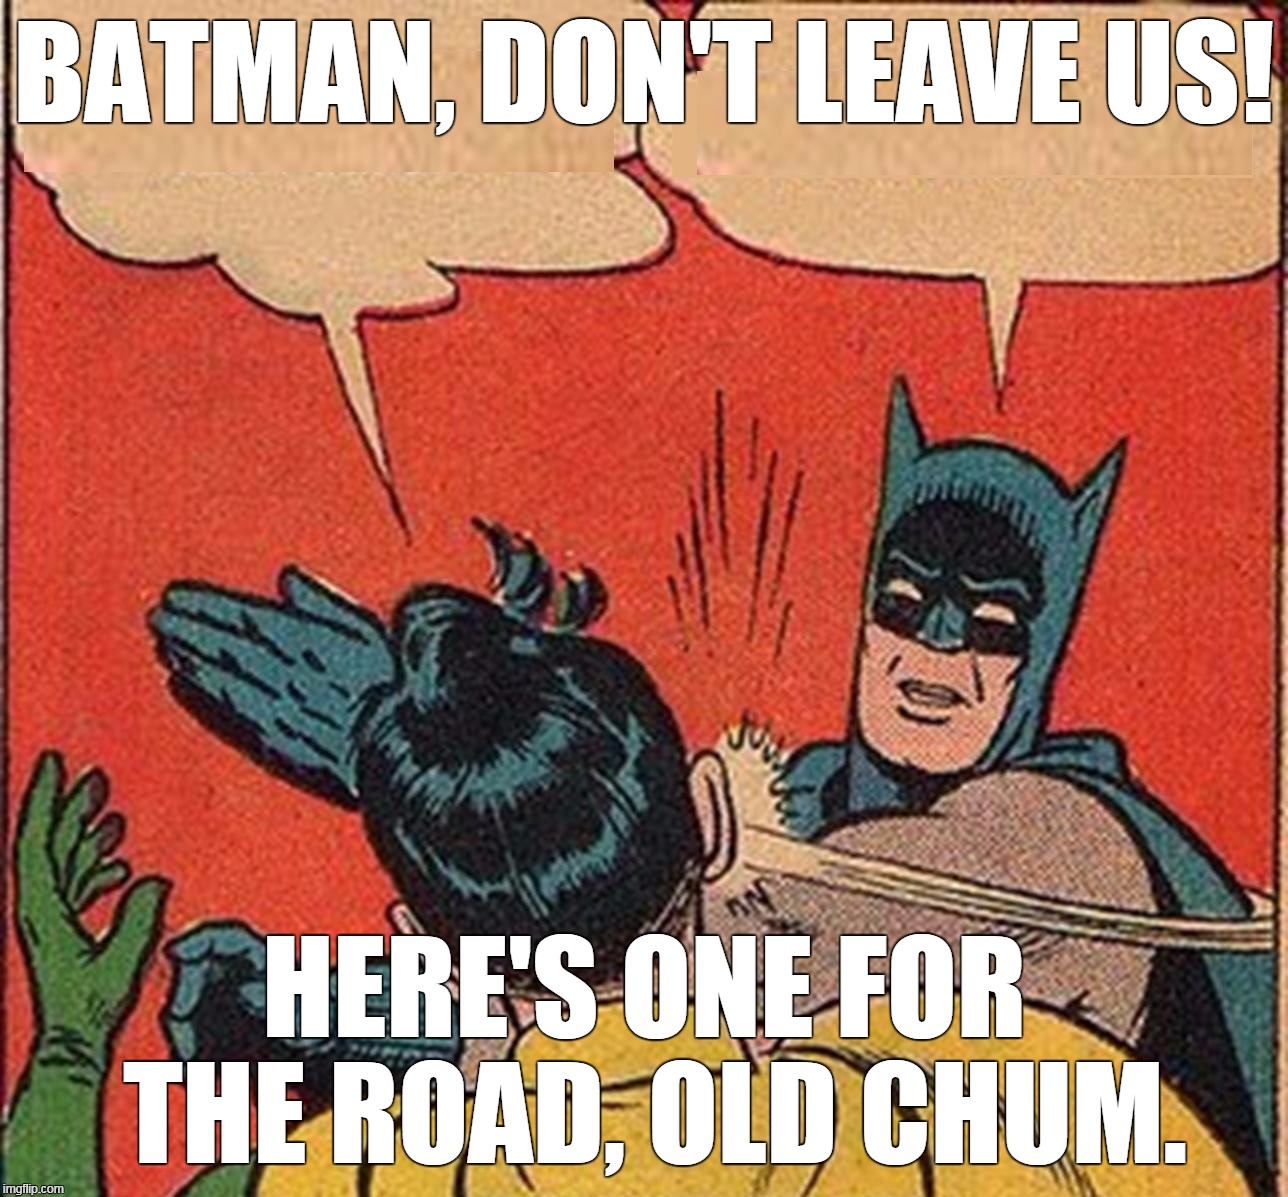 RIP, Mr. West | BATMAN, DON'T LEAVE US! HERE'S ONE FOR THE ROAD, OLD CHUM. | image tagged in batman,adam west,batman slapping robin | made w/ Imgflip meme maker